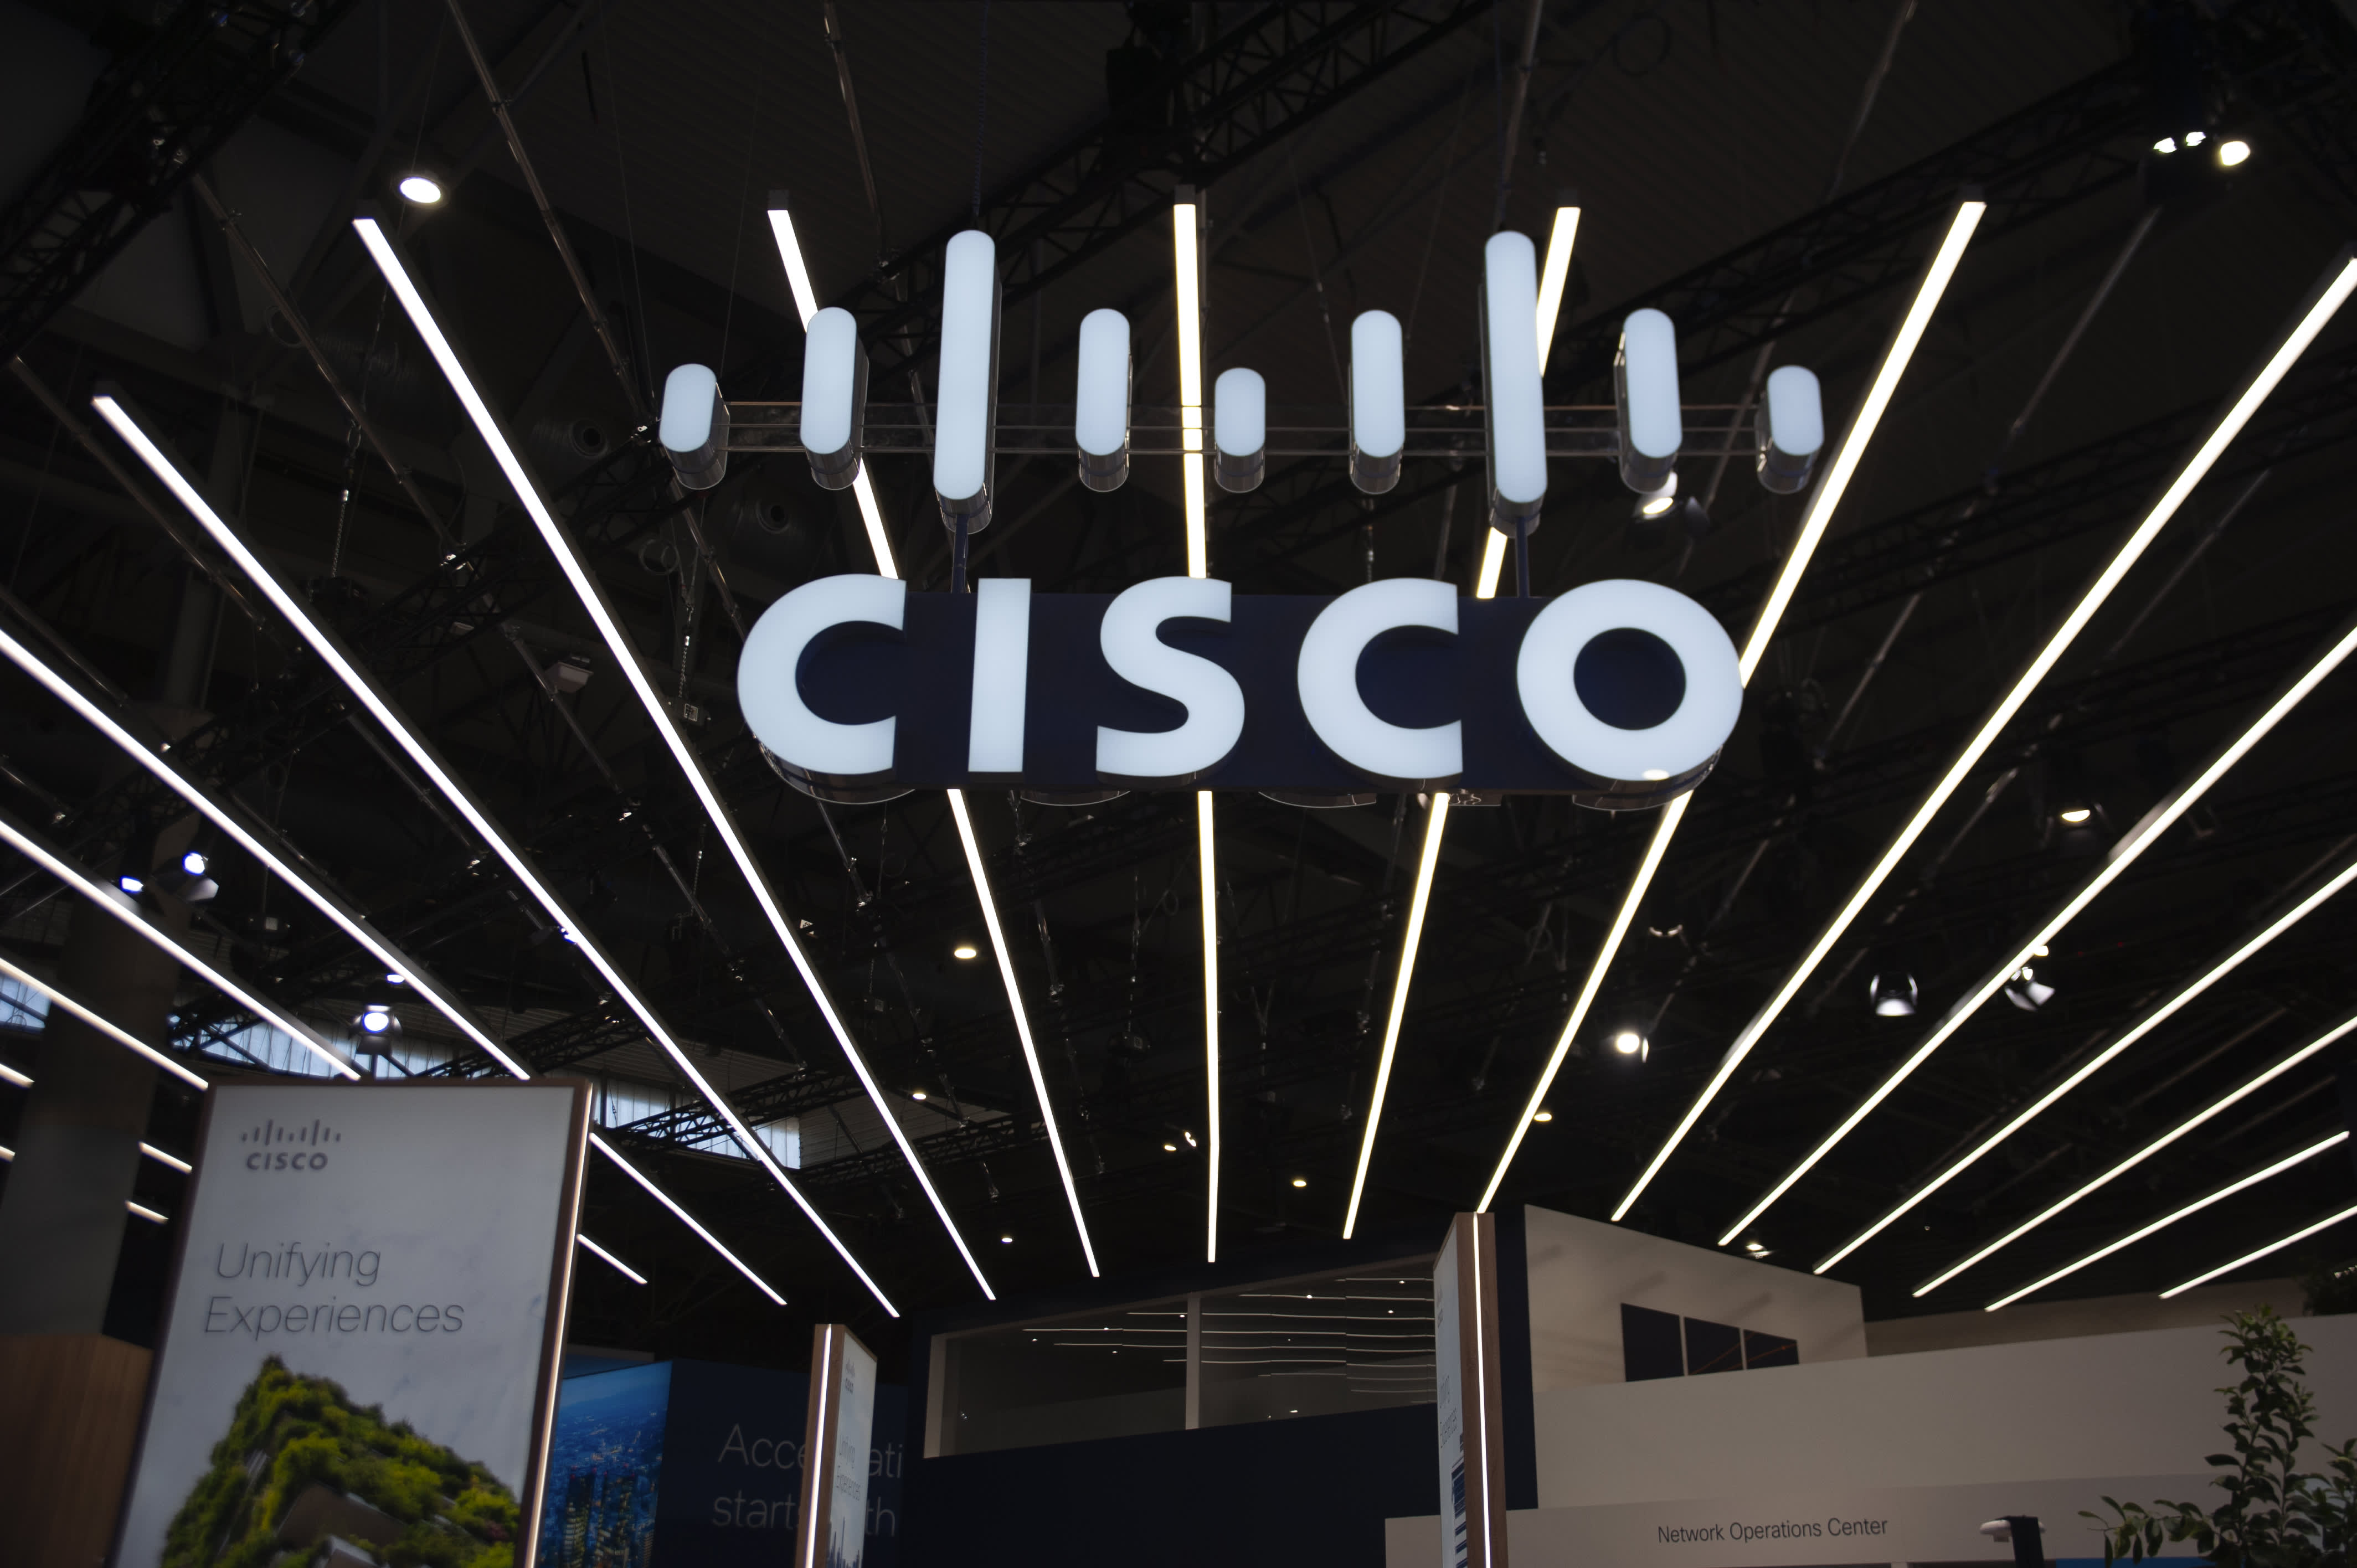 Cisco debuts new AI-focused security system after $28 billion deal to buy Splunk